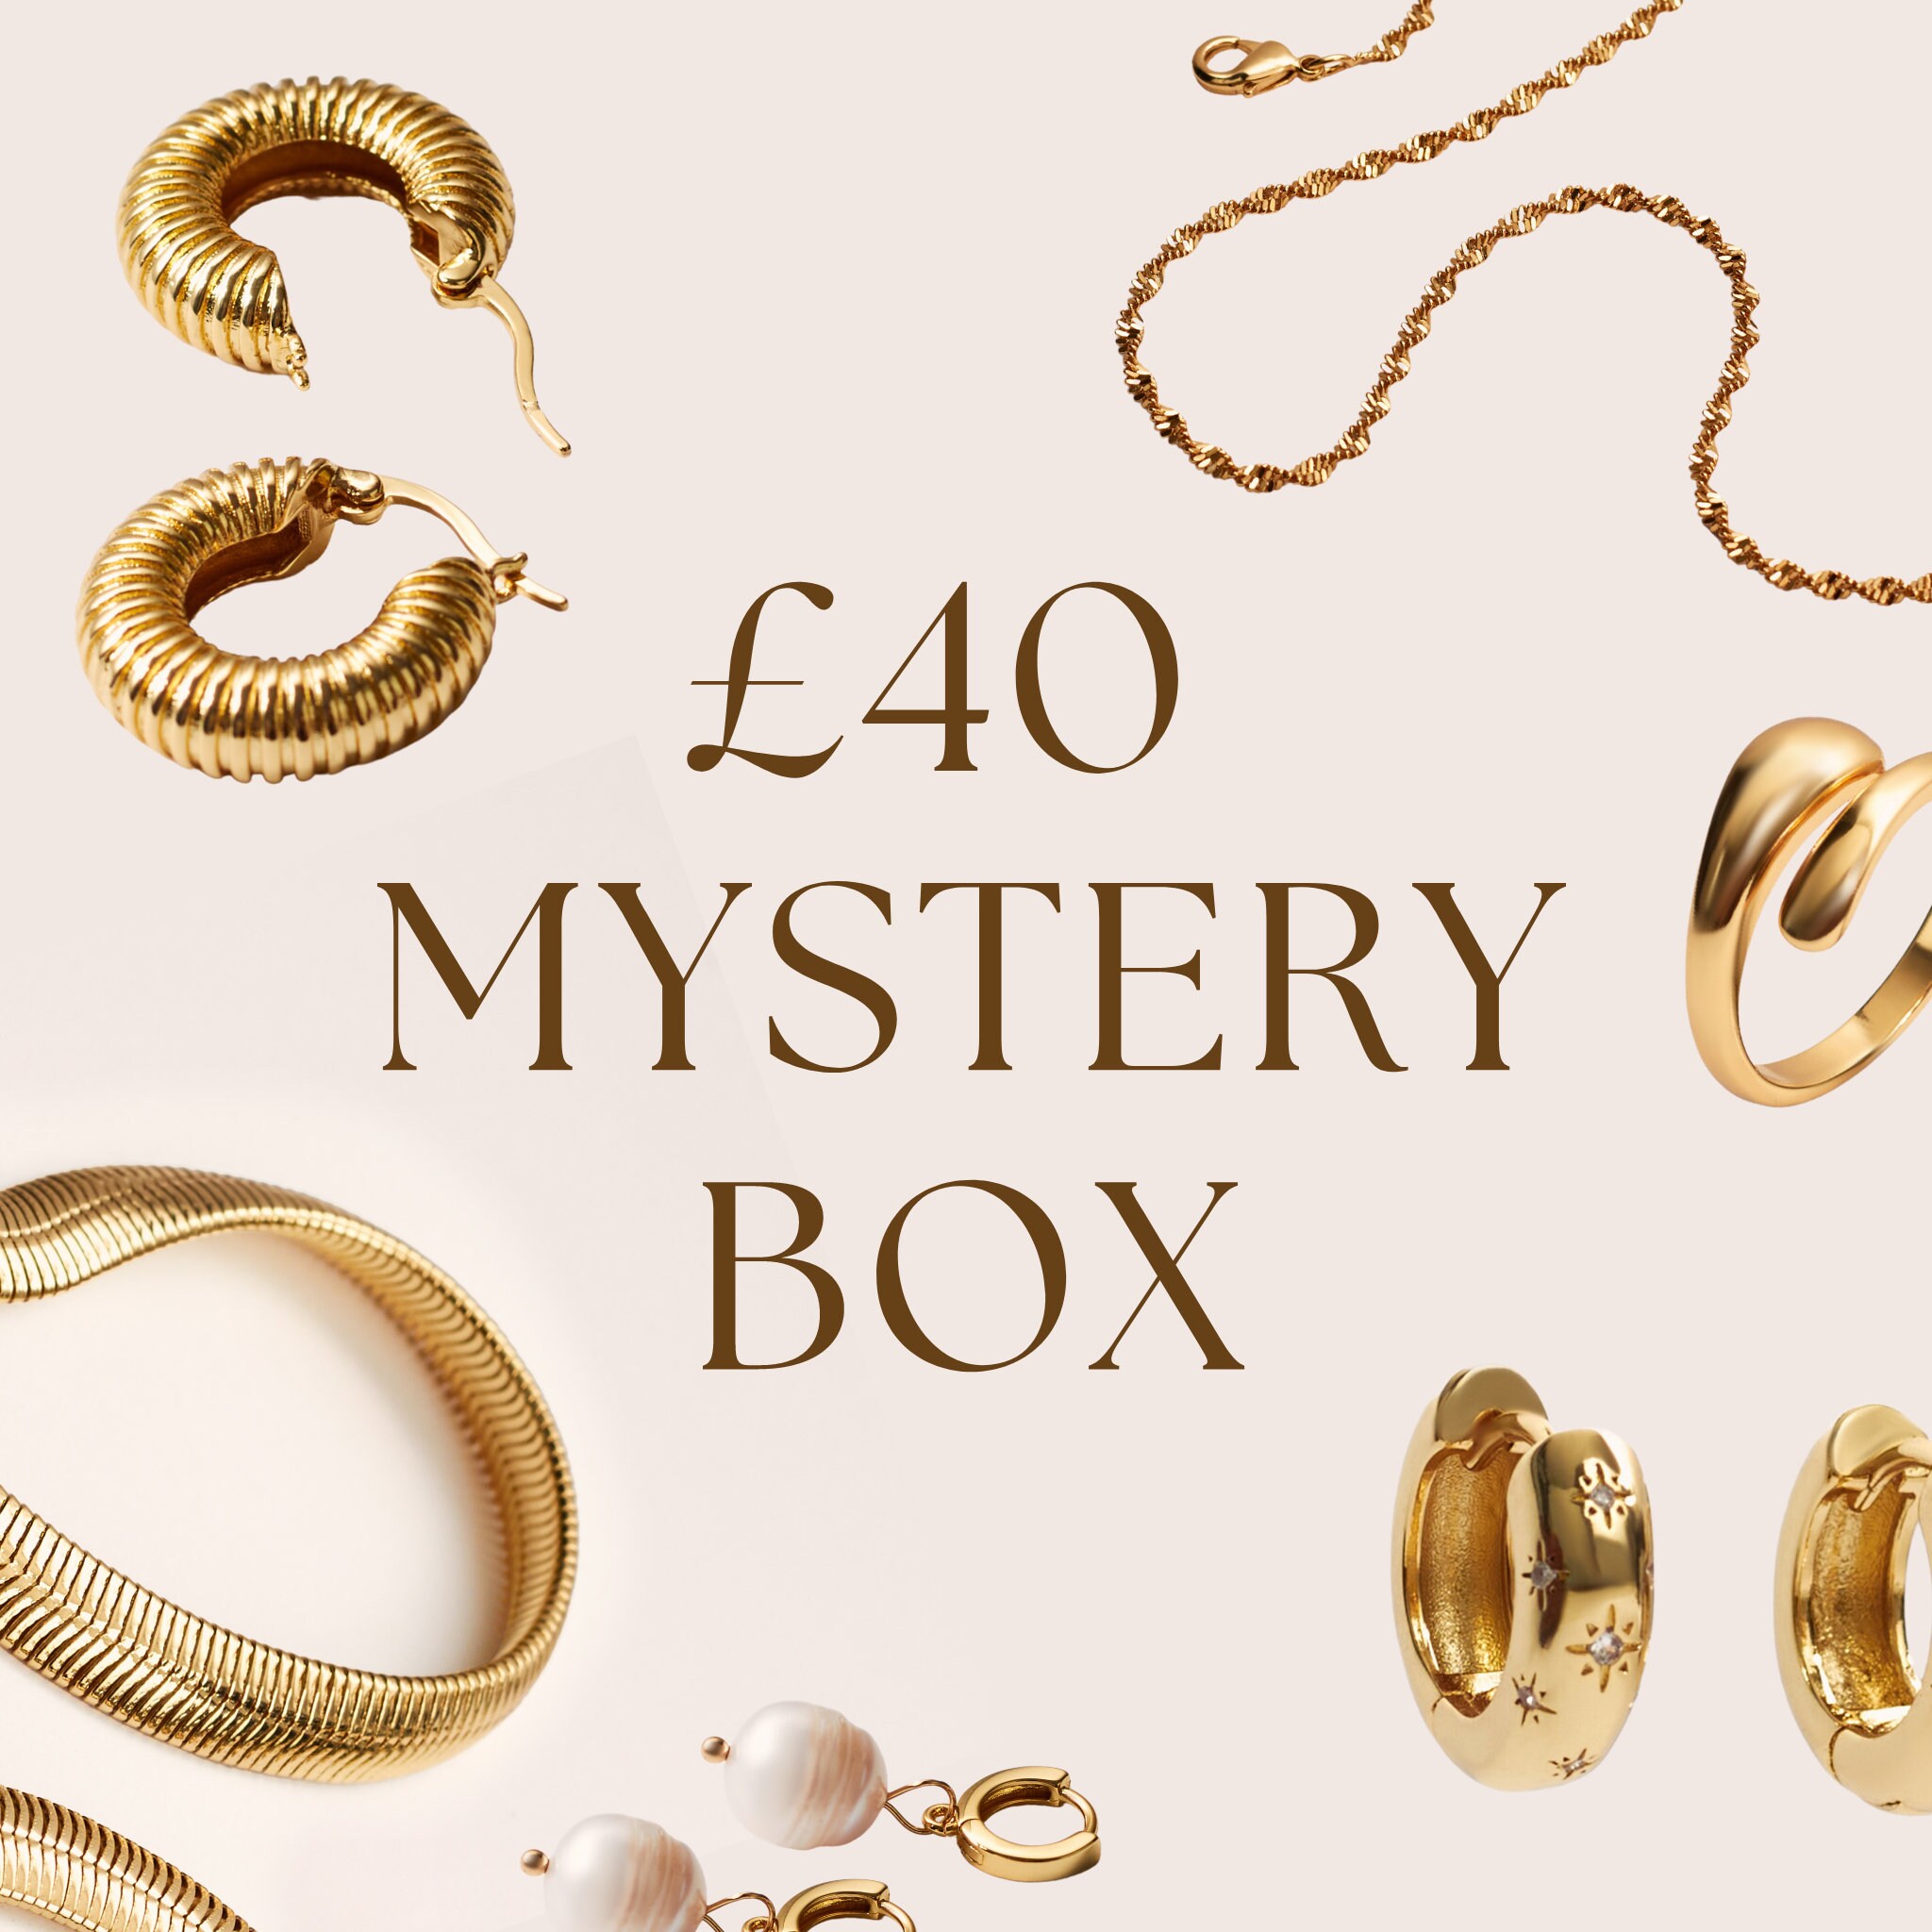 18K Gold Surprise Box - Mystery Dainty Minimal Jewellery Gifts For Her UK Elegant Accessories Tarnish Free Hypoallergenic